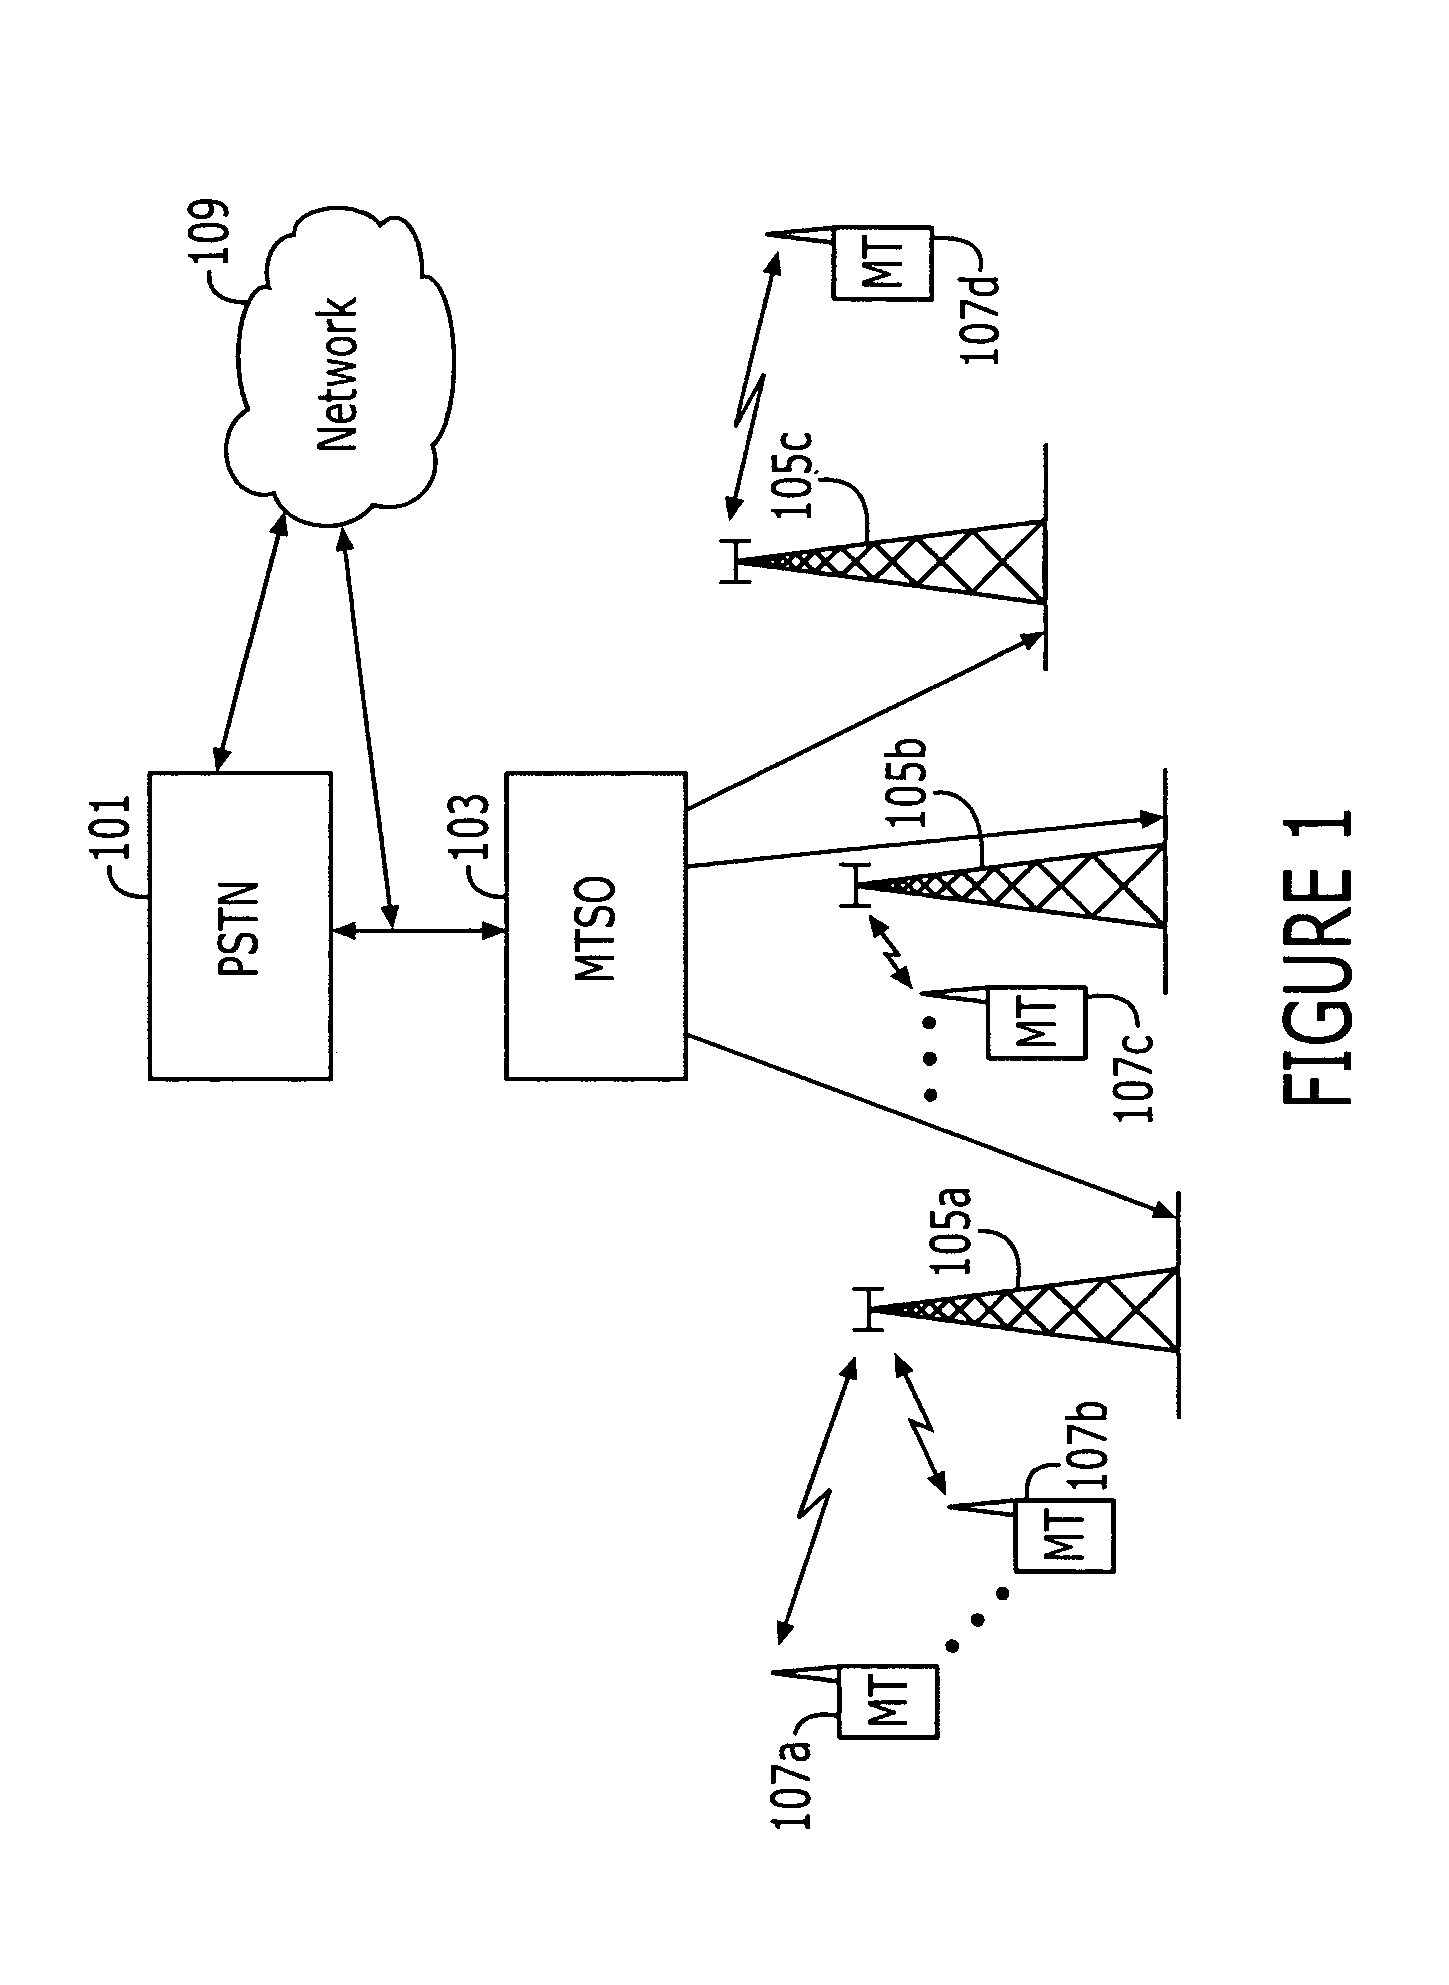 Methods of processing digital image and/or video data including luminance filtering based on chrominance data and related systems and computer program products